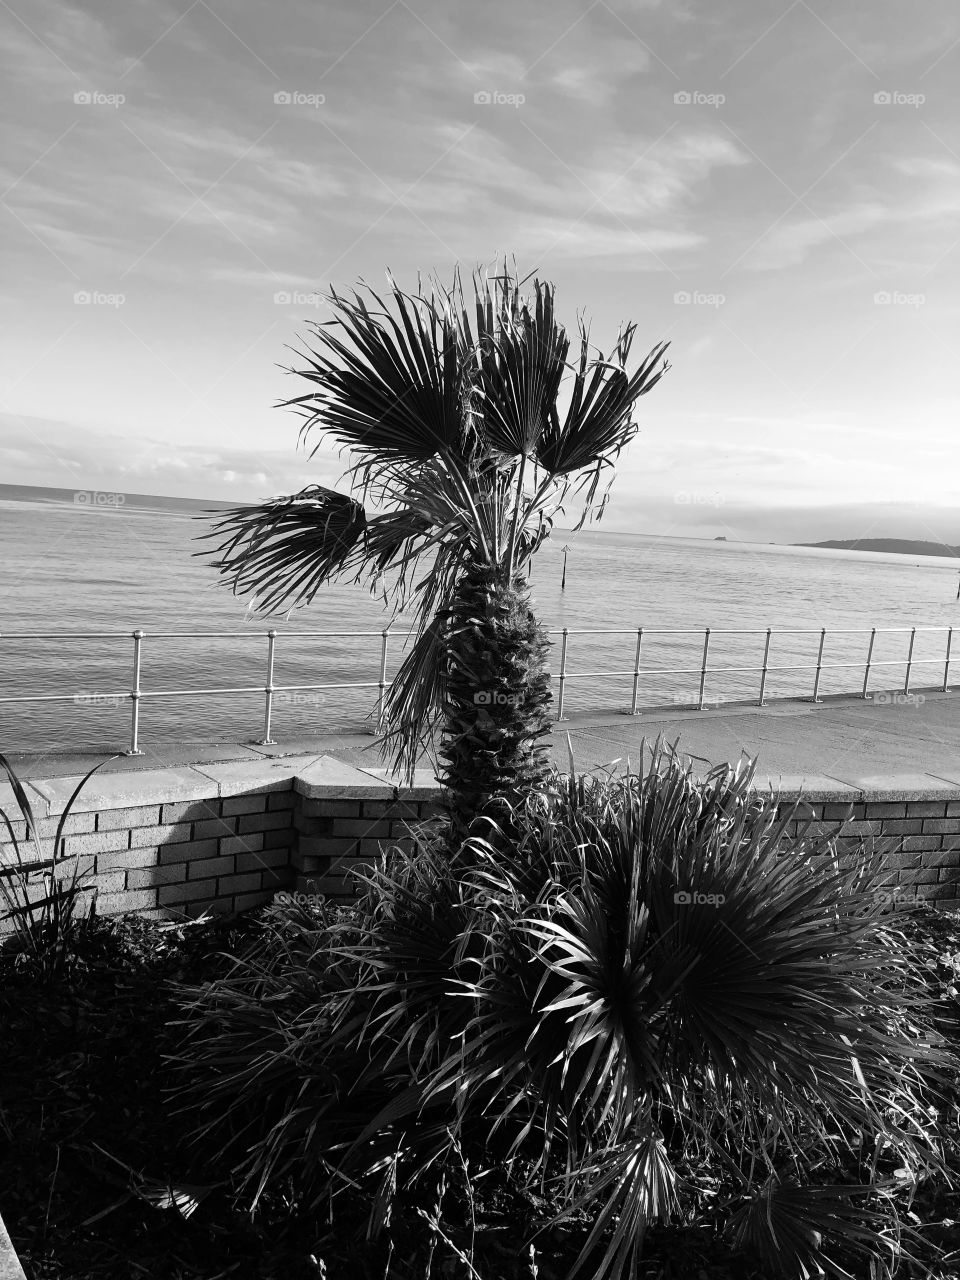 This is the black and white version of January 2020’. Teignmouth, Devon’s seafront.